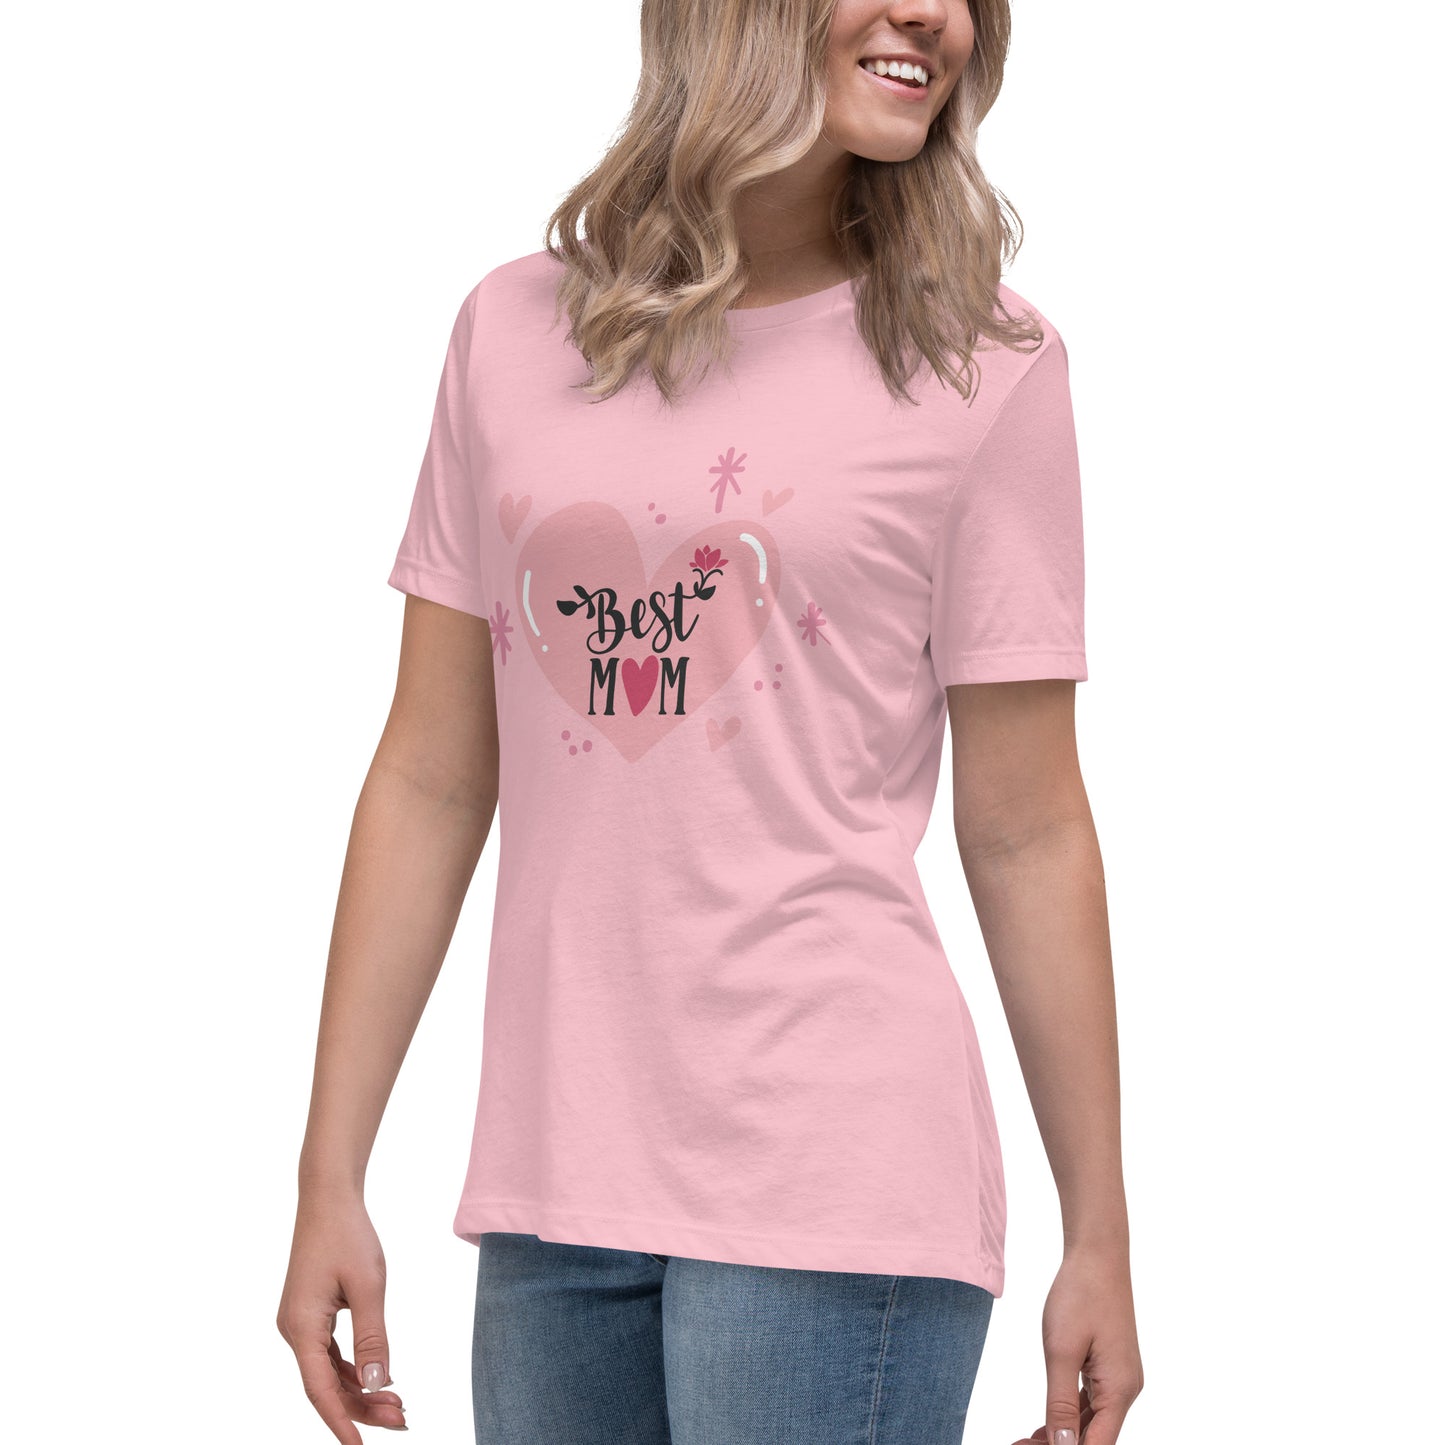 Women with pink t shirt with hart and text best MOM